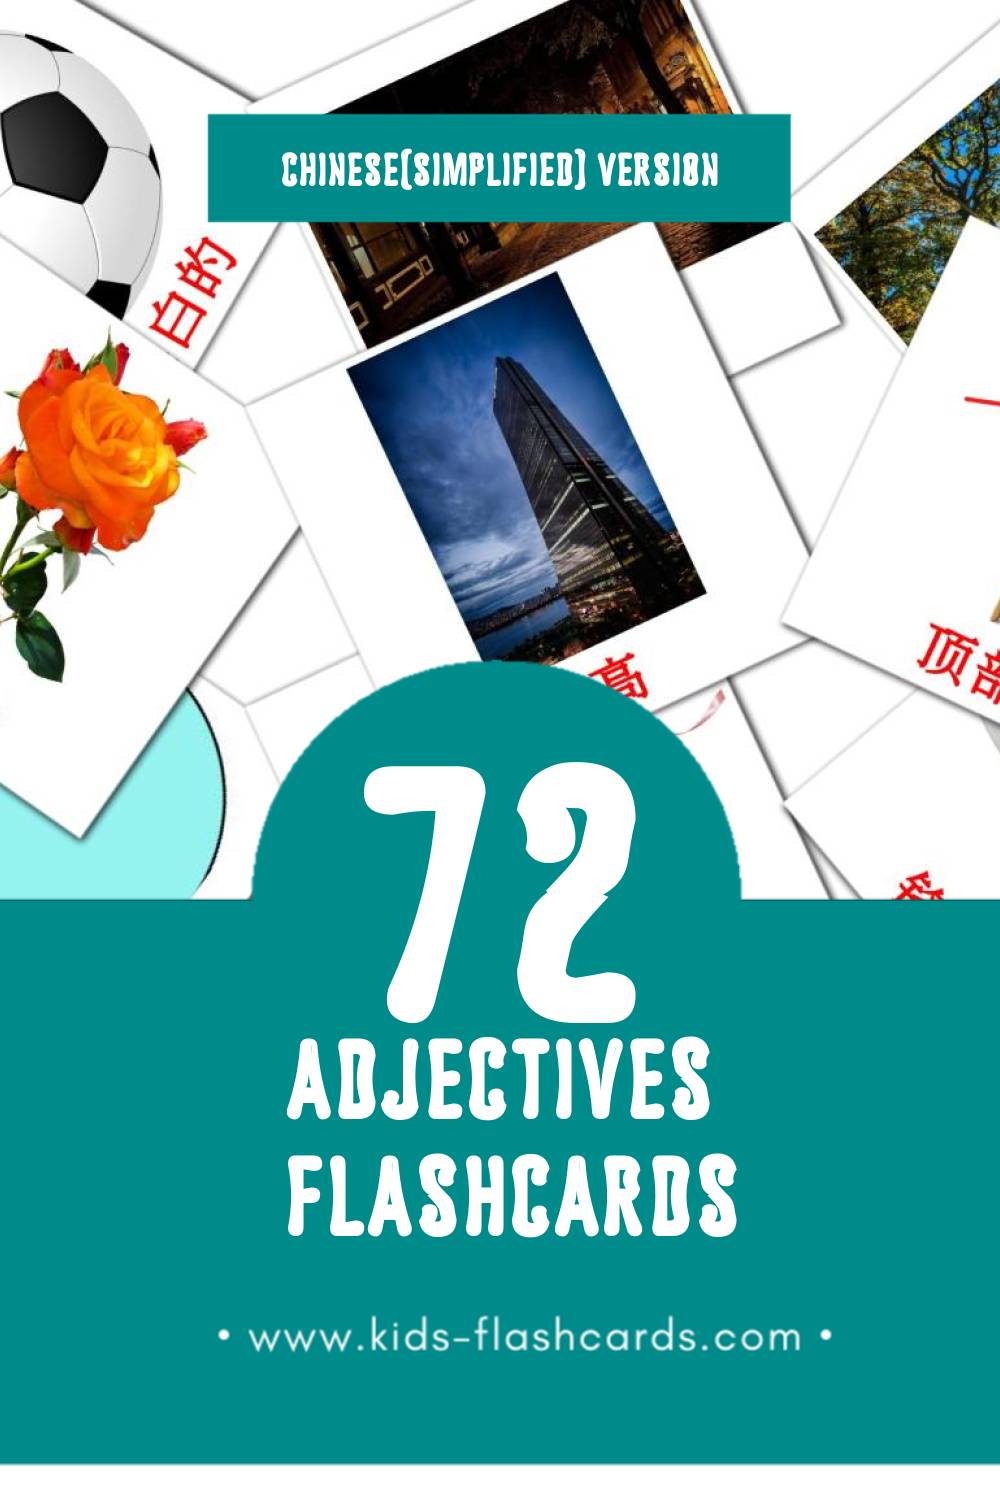 Visual 形容词 Flashcards for Toddlers (74 cards in Chinese(Simplified))